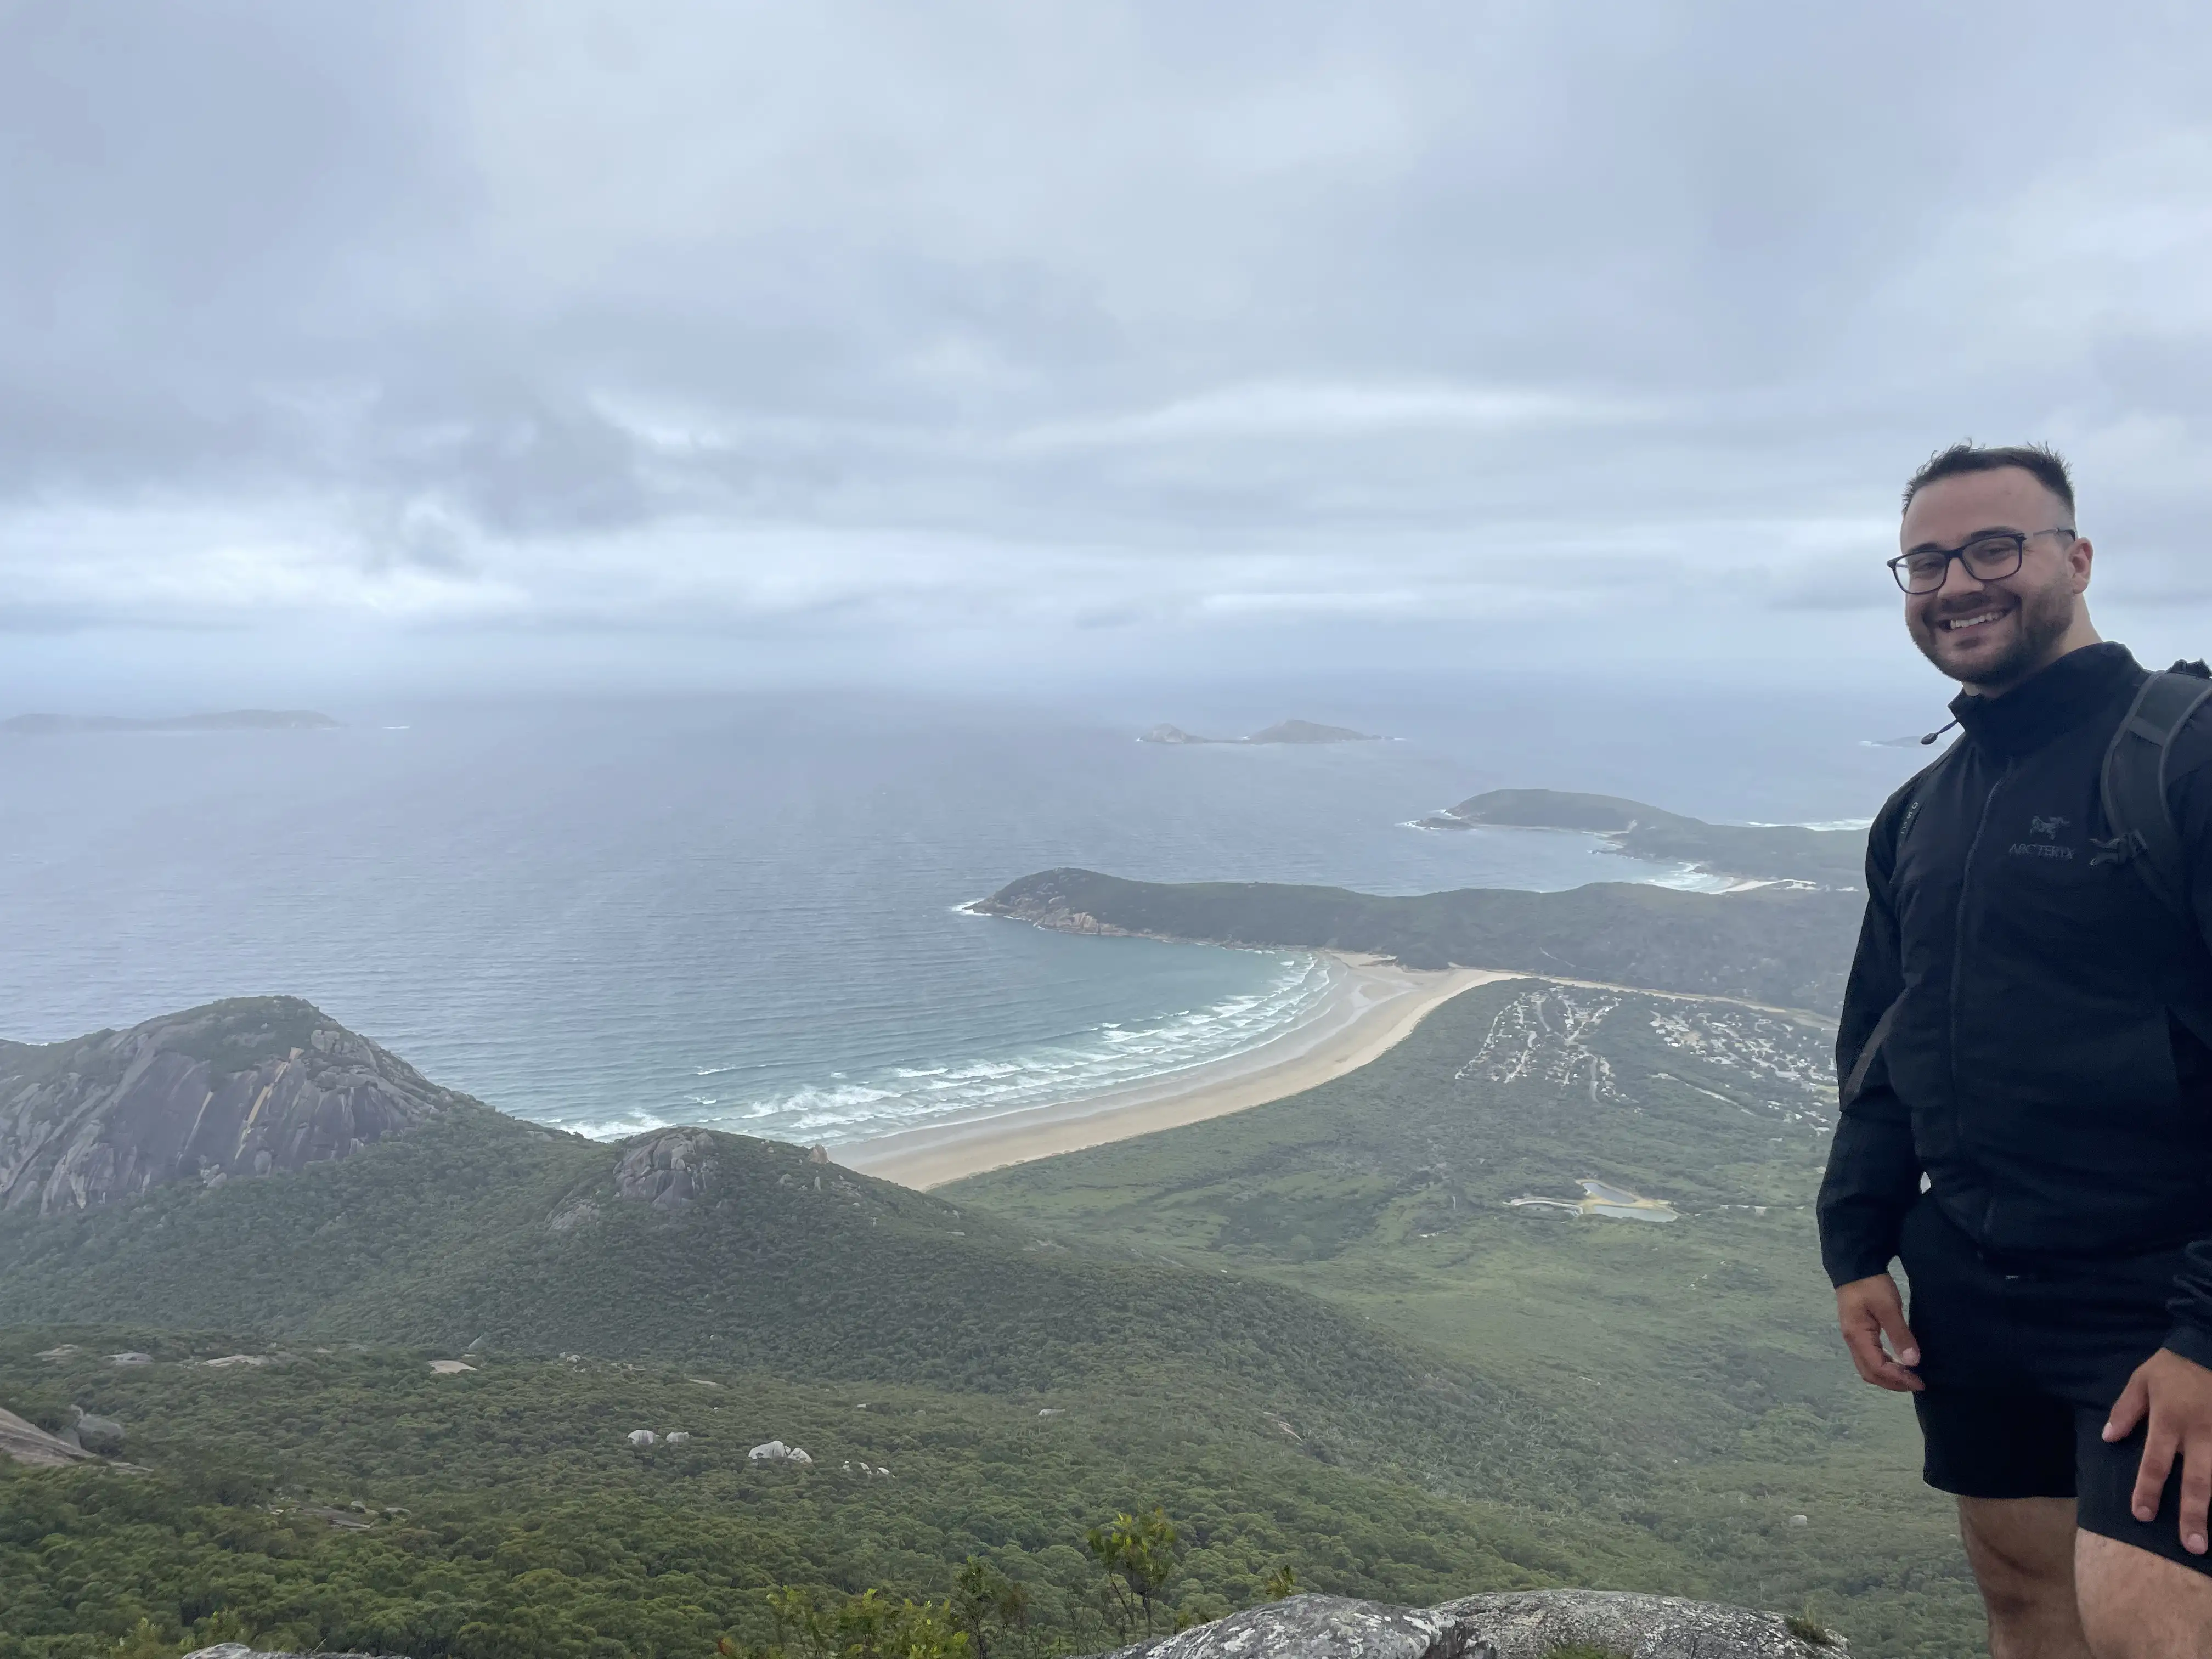 Me at Wilson Promotory Hike, Australia, with Ocean and Island View, representing Work Life Balance